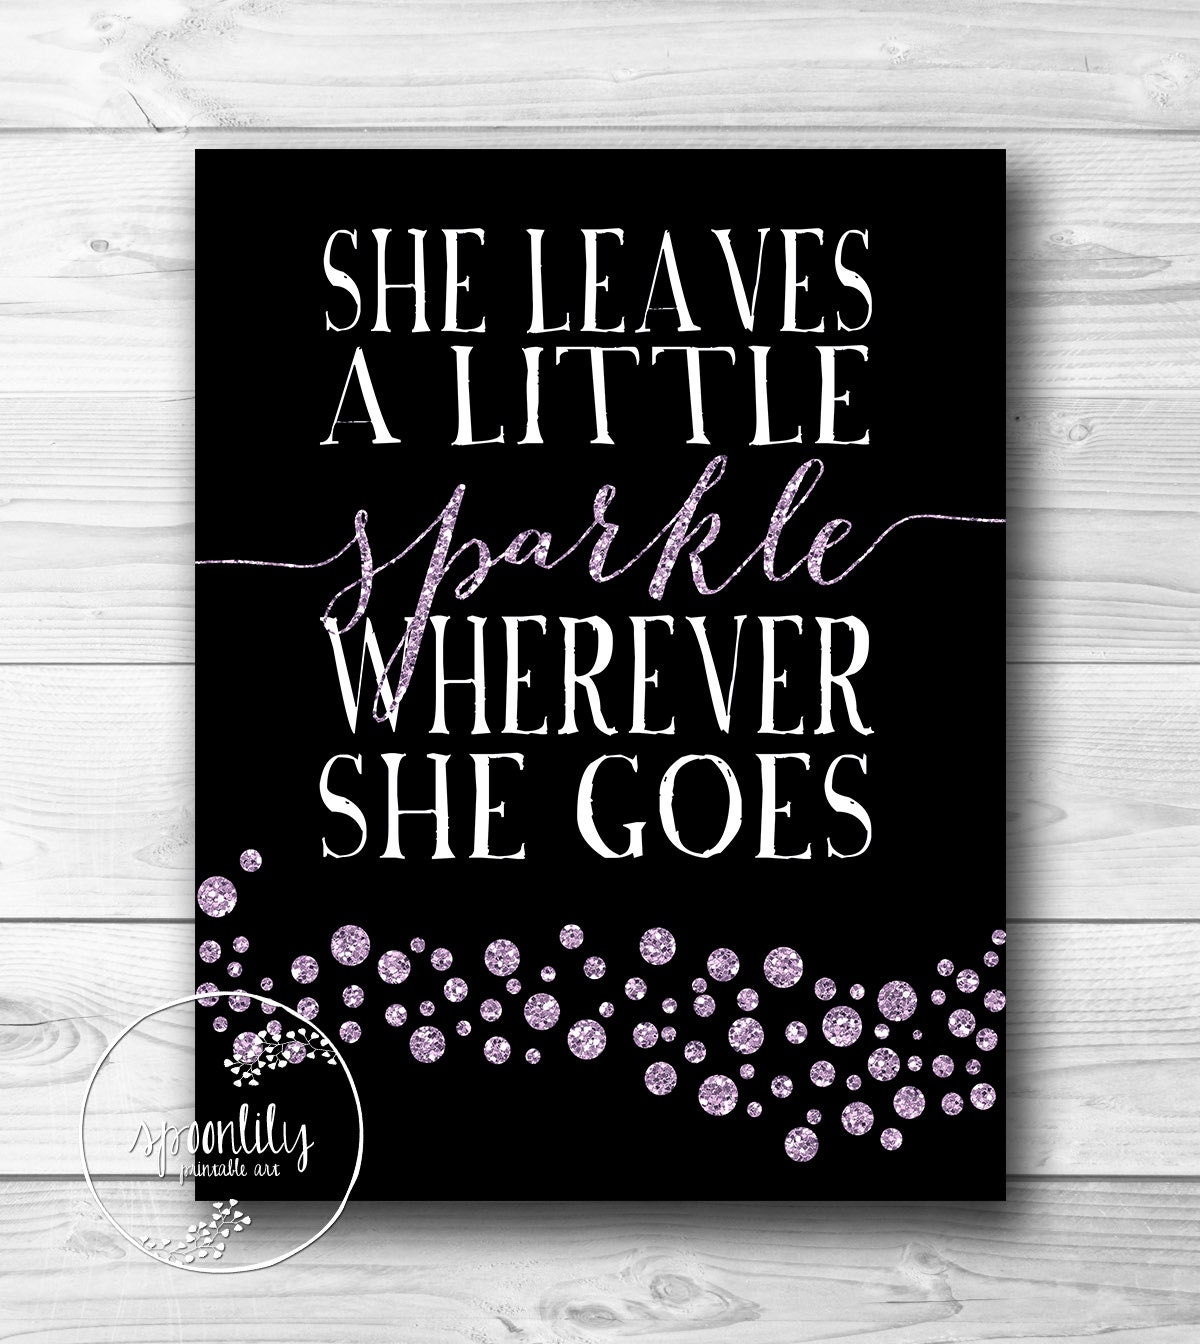 Purple Sparkles and Glitter "She Leaves a Little Sparkle" Nursery Artwork - 8x10 INSTANT DOWNLOAD - SpoonLily